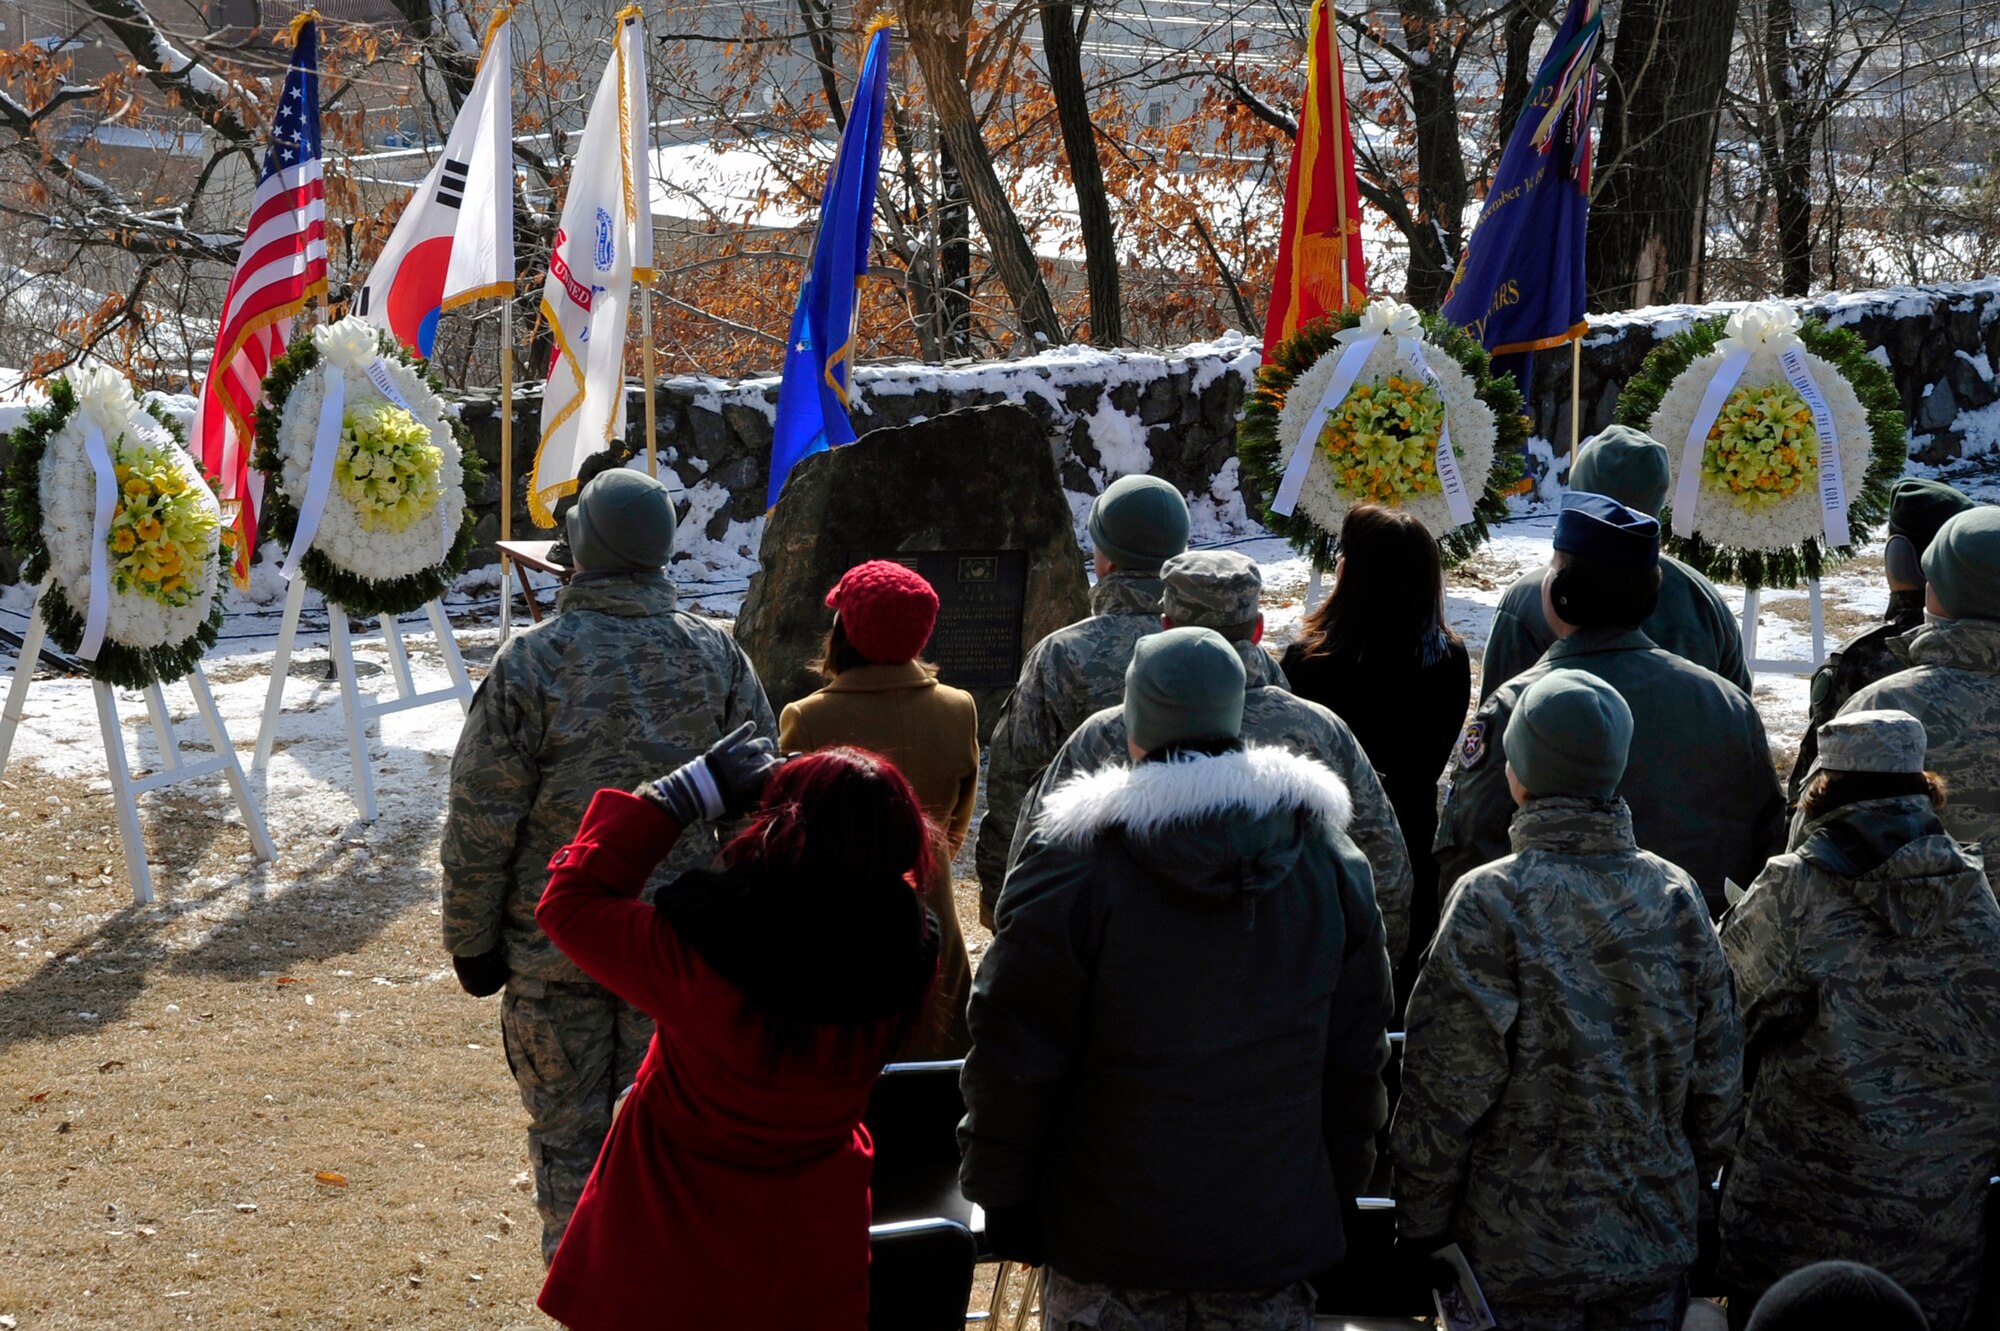 More than 100 Osan community members stand for Taps after the wreath laying at the 62nd Anniversary of the Battle of Bayonet Hill Commemoration Ceremony Feb. 7, 2013, at the Hill 180 Site, Osan Air Base, Republic of Korea.  The battle marked the last time bayonets were used in combat. (U.S. Air Force photo/Airman 1st Class Alexis Siekert)